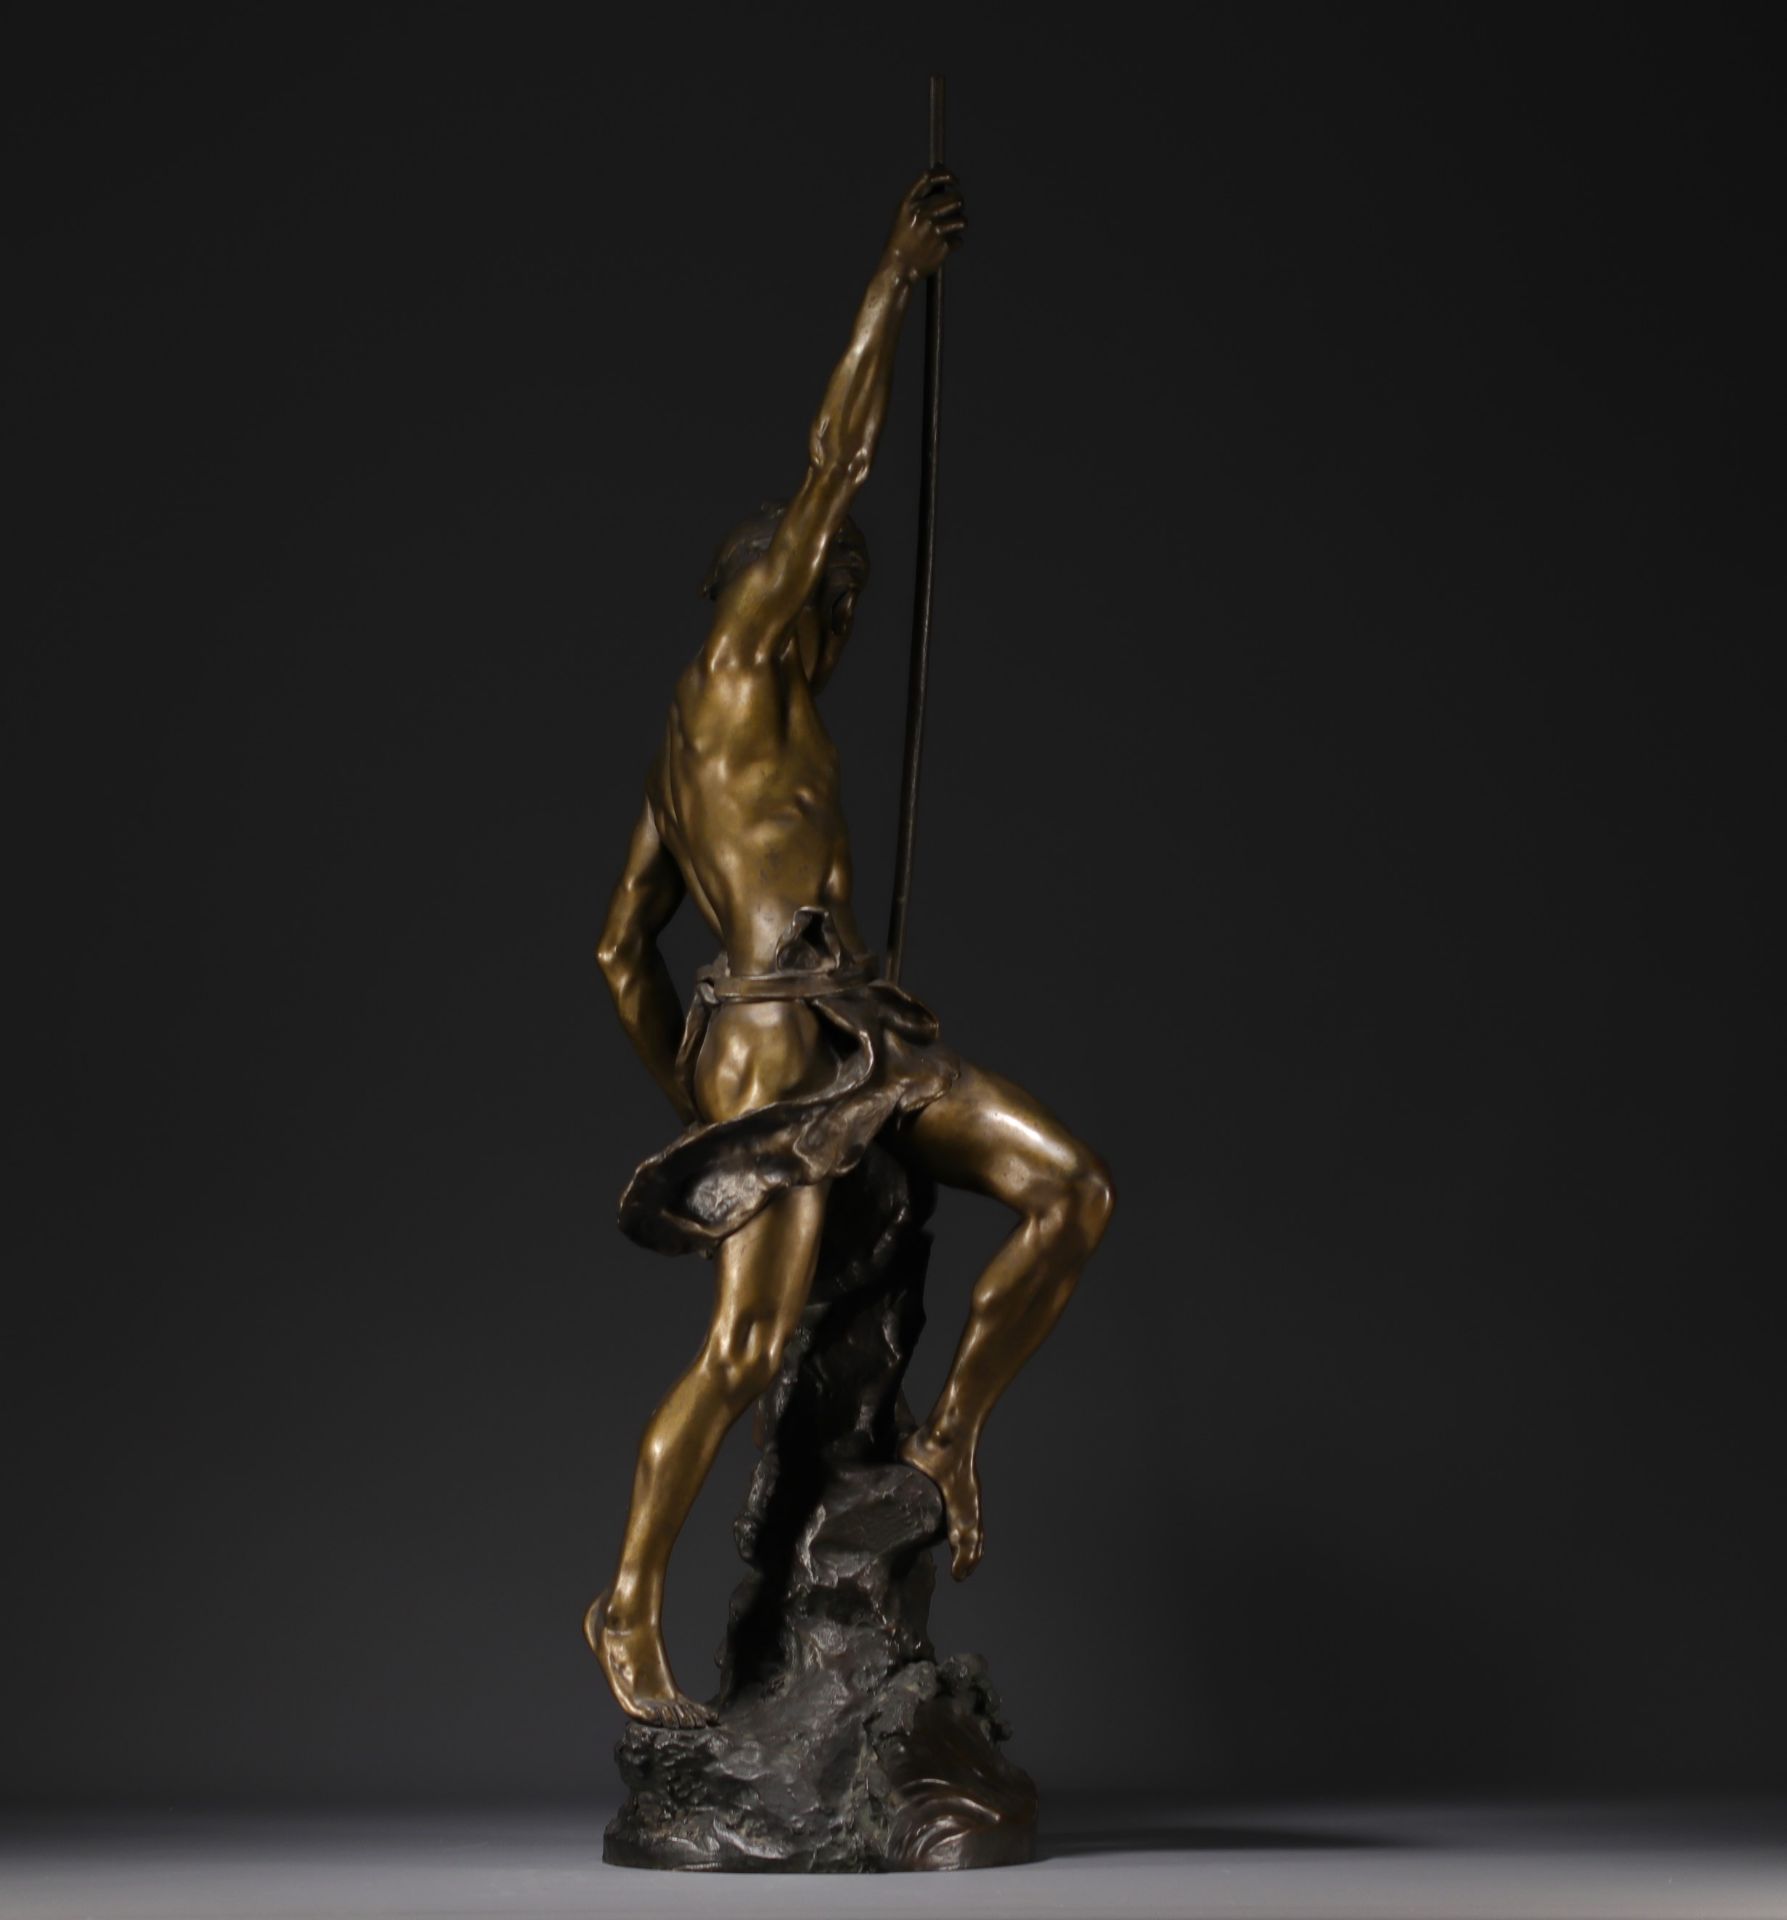 Ernest Justin FERRAND (1846-1932) "The young sinner" Sculpture in chased and patinated bronze. - Bild 4 aus 7